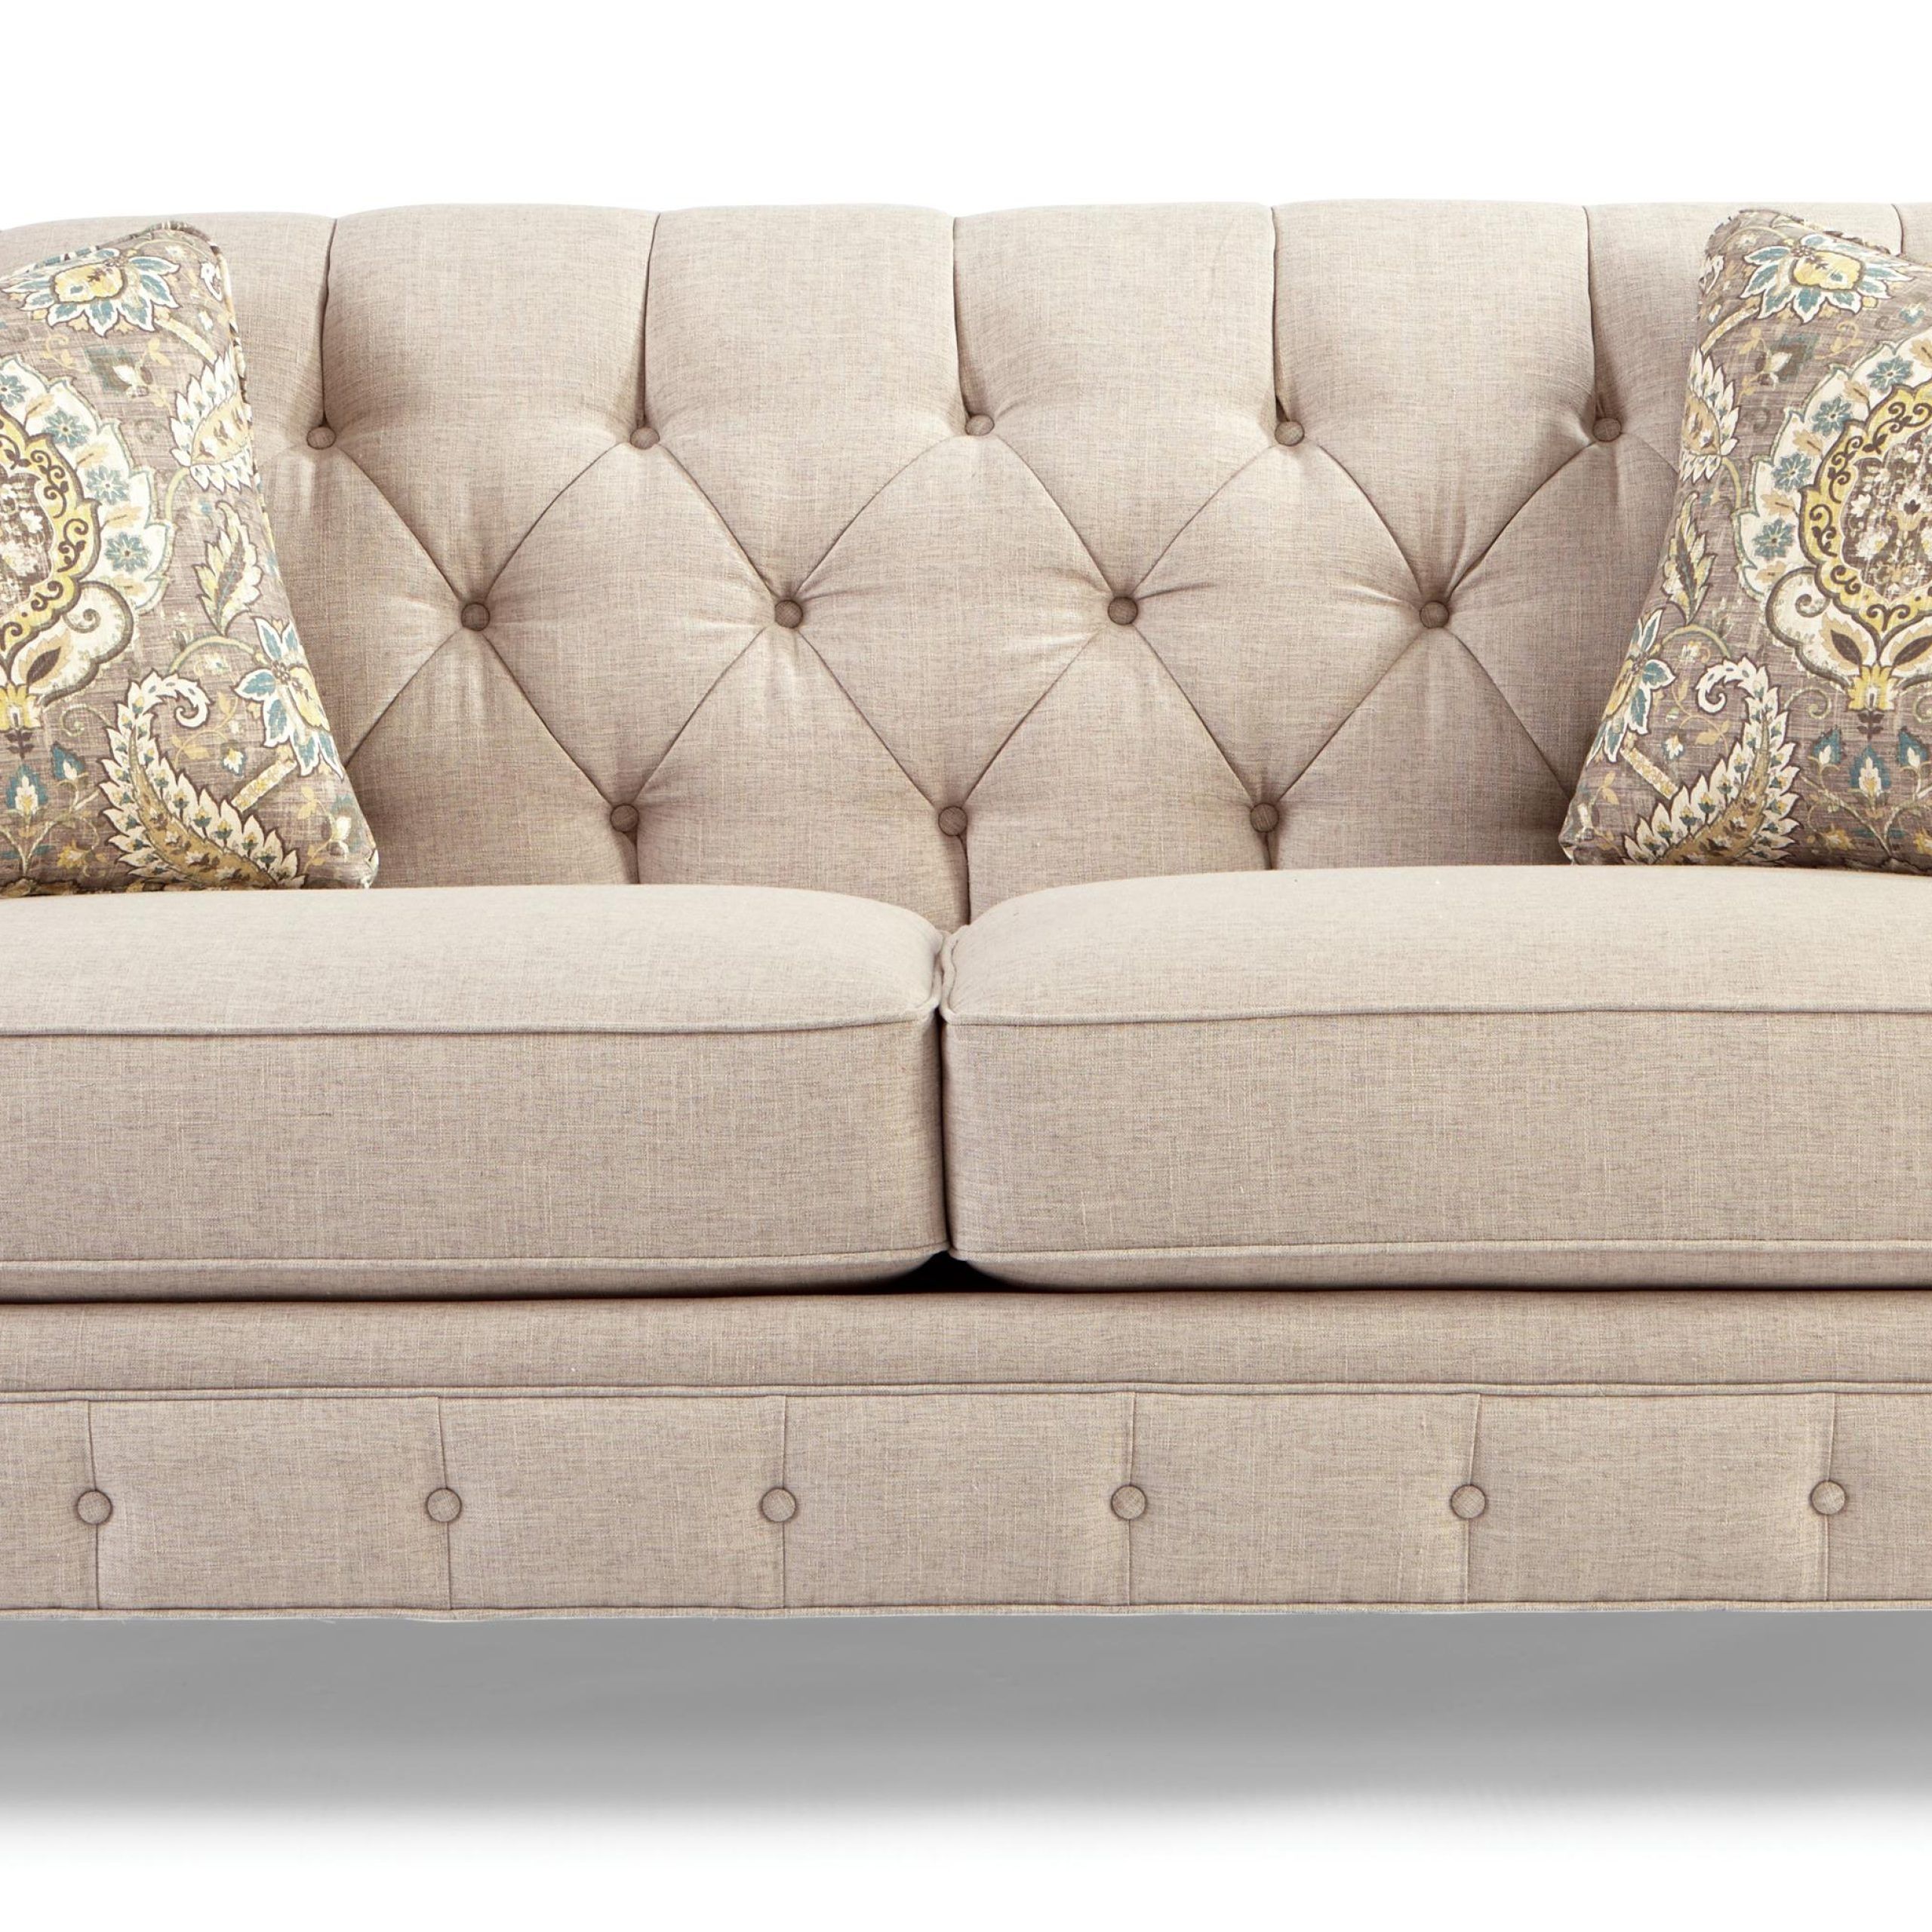 Traditional Button Tufted Sofa With Wide Flared Armscraftmaster Within Tufted Upholstered Sofas (View 4 of 20)